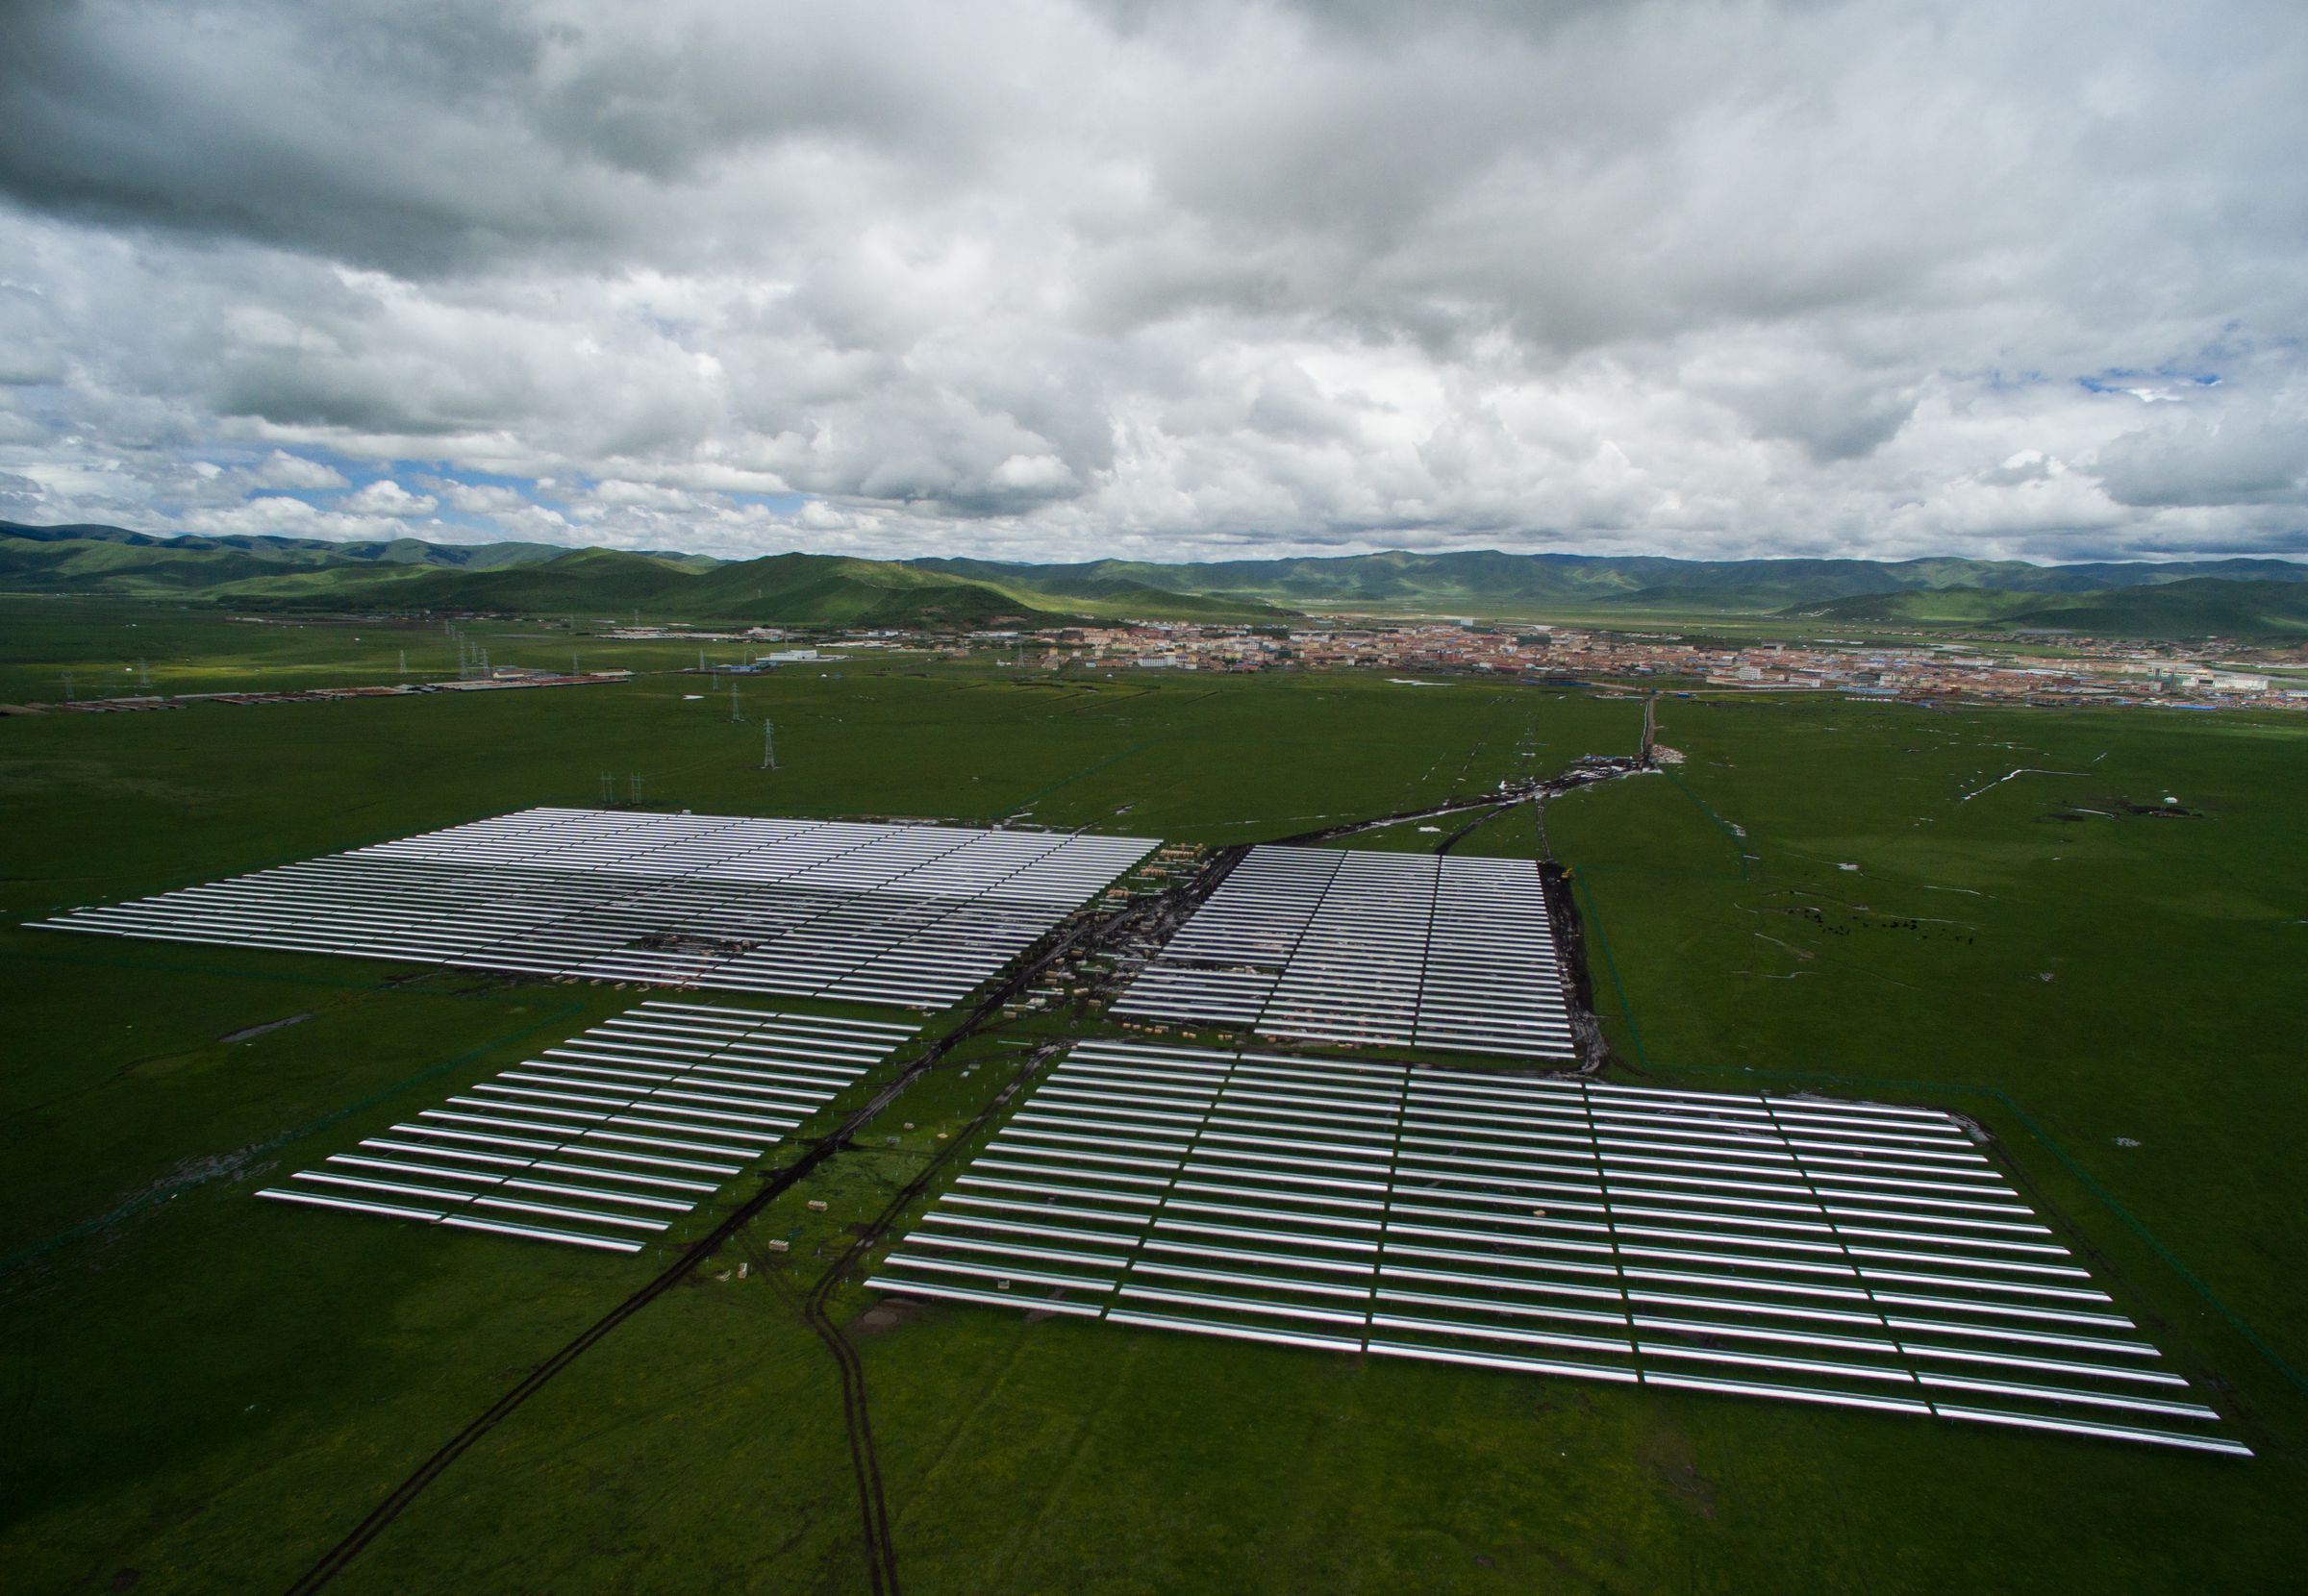 Apple Builds Solar Projects With SunPower in China